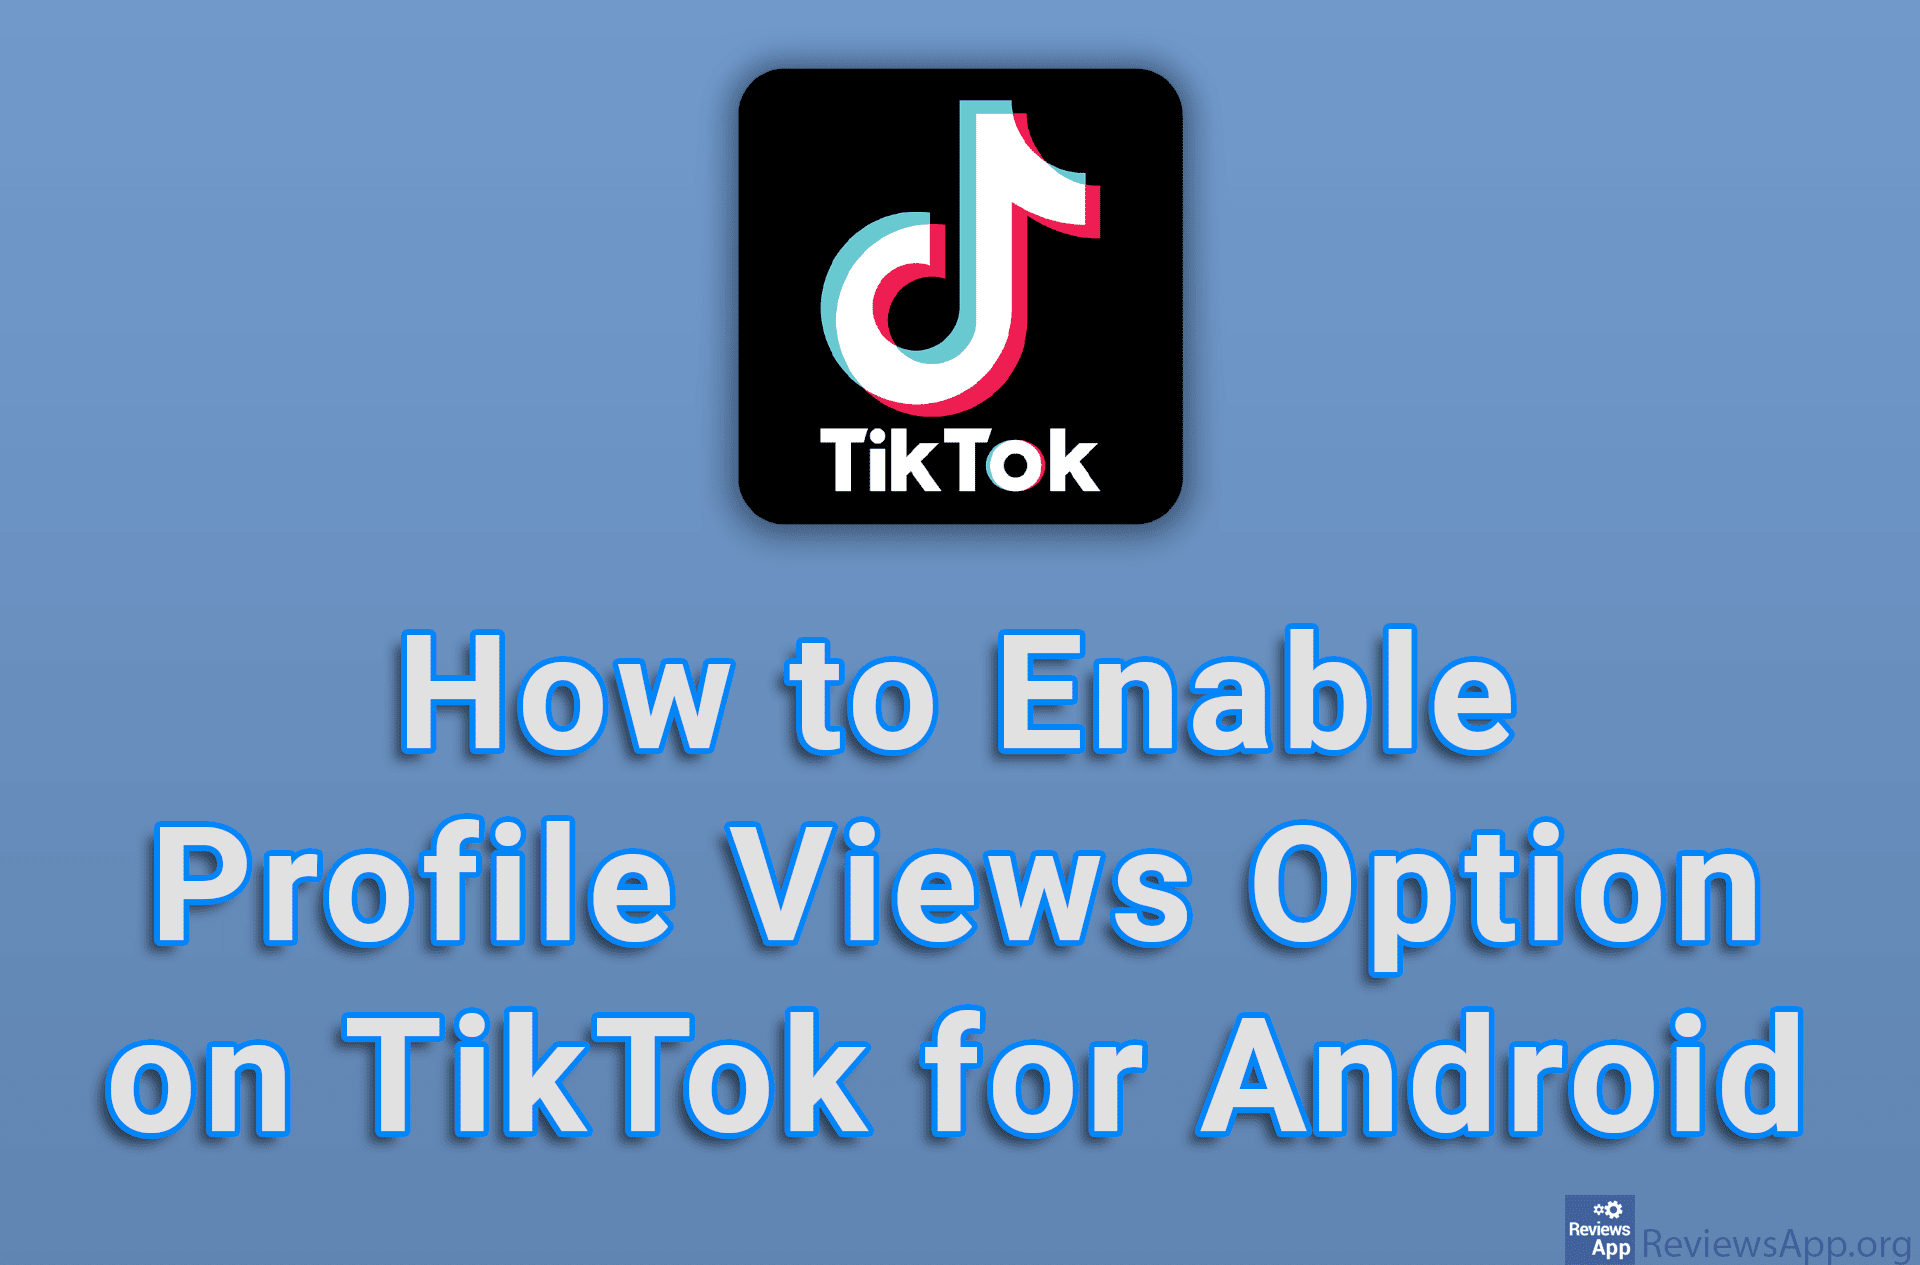 How to Enable Profile Views Option on TikTok for Android